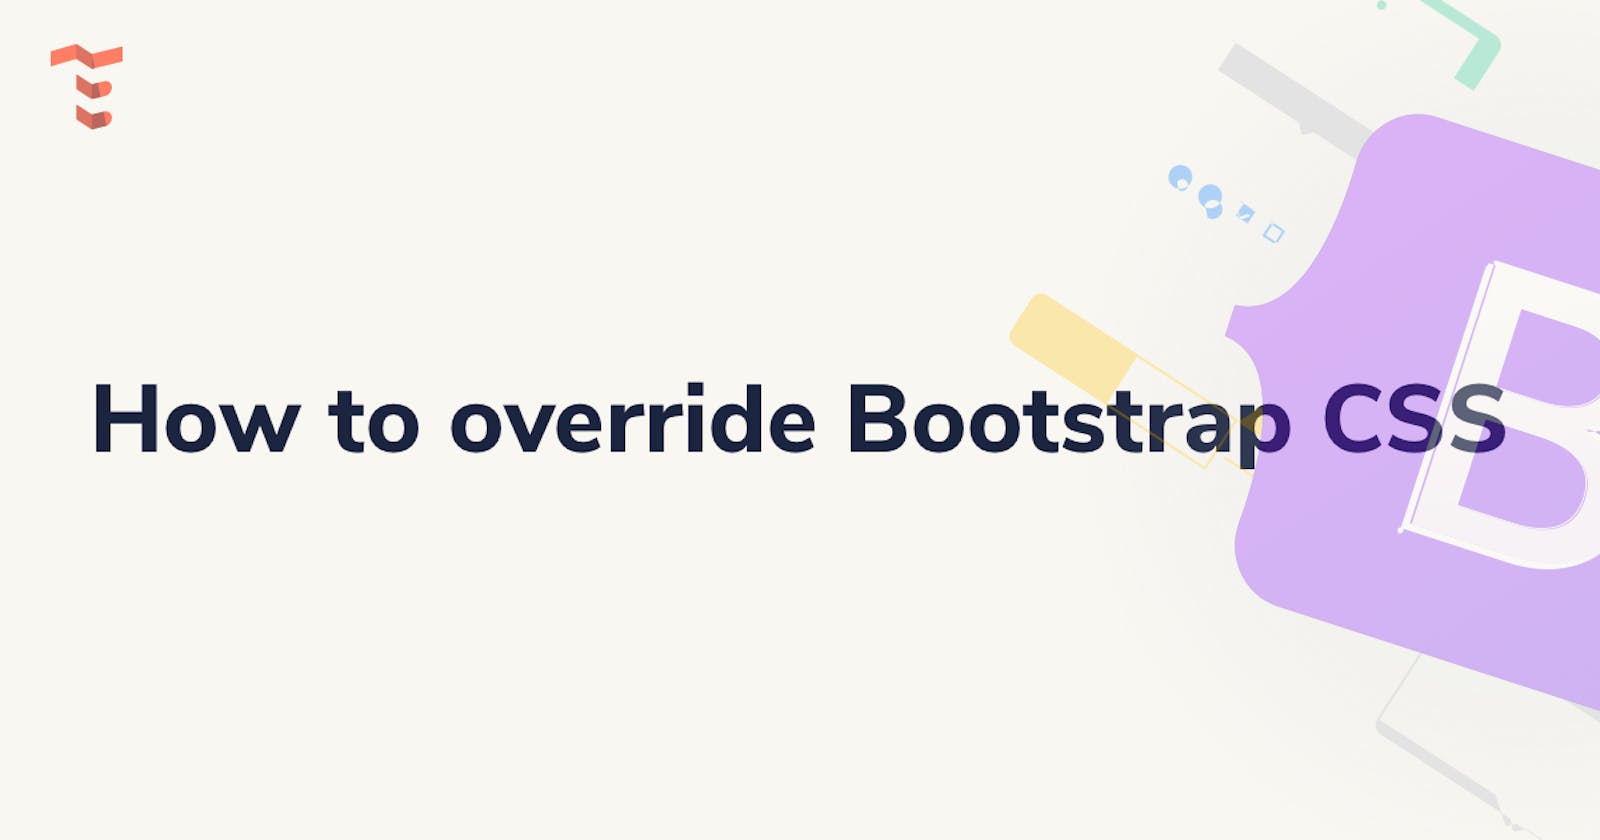 How to override Bootstrap CSS